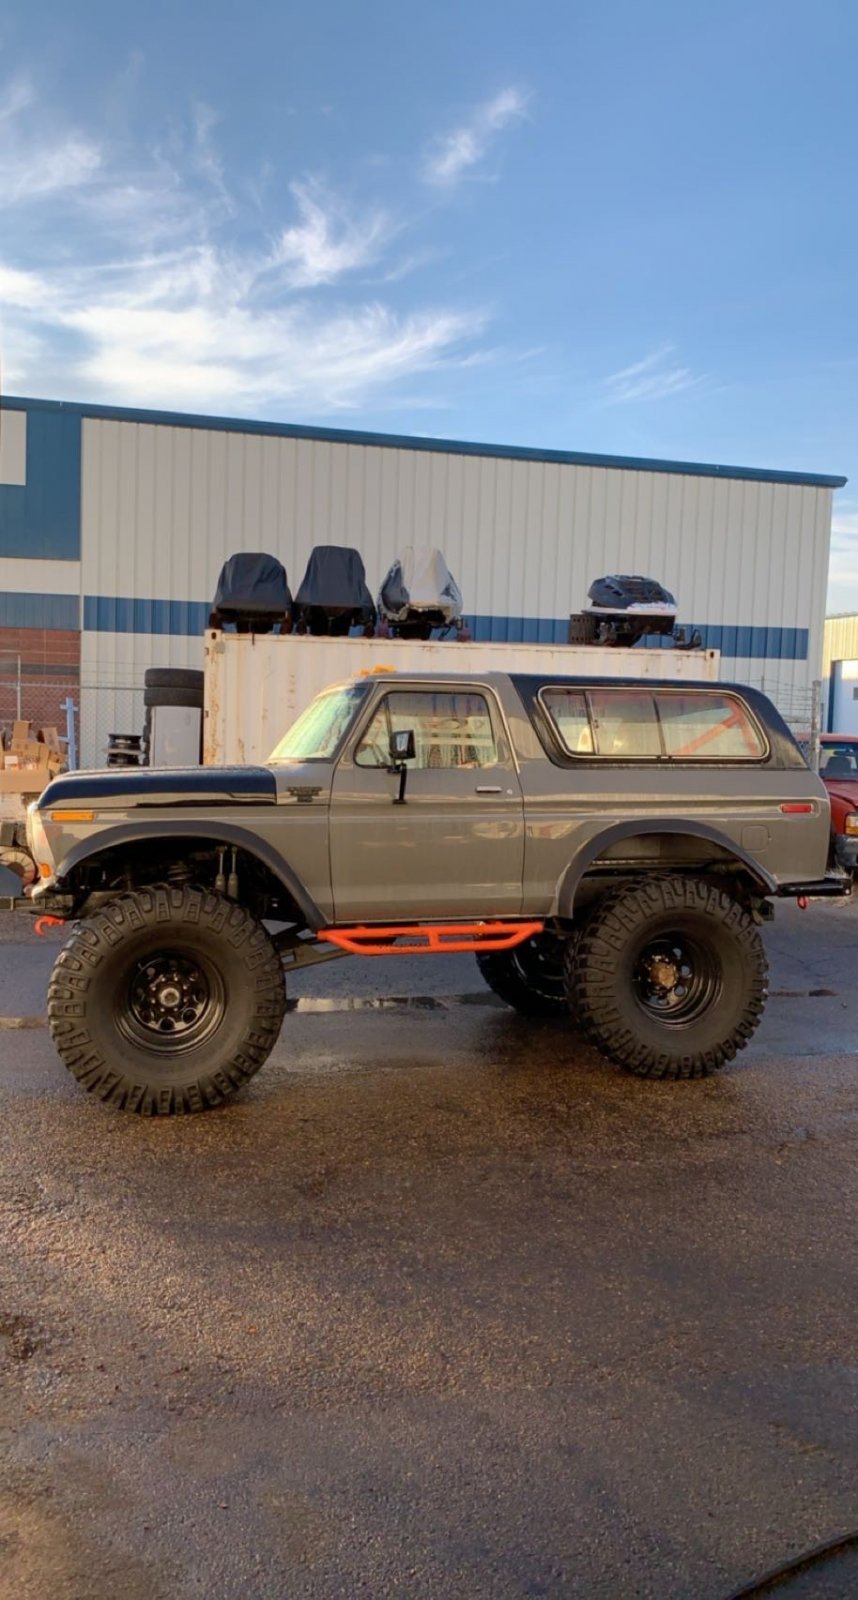 16 Year Old Built His Dream Ford Bronco 8.jpeg